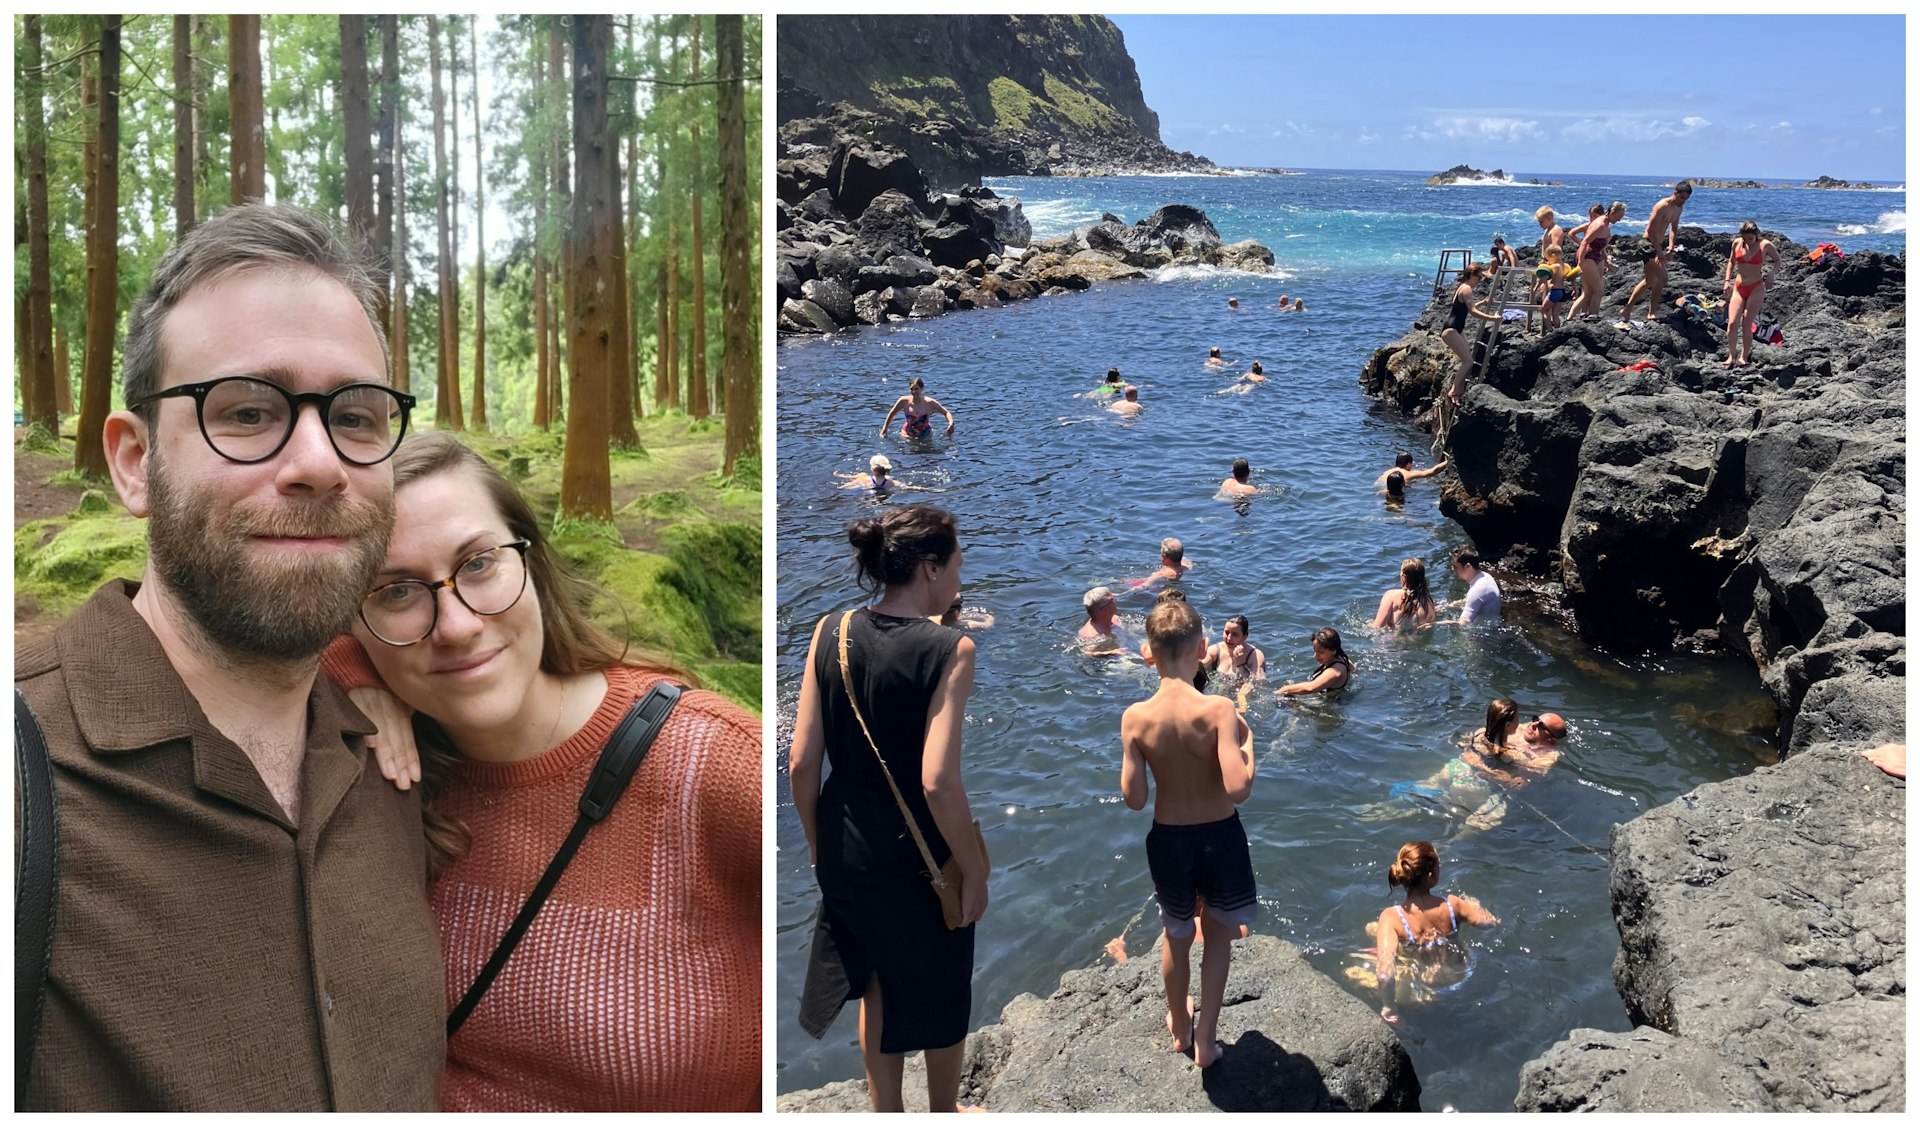 Erin and husband pose in a forest in the Azores and swim in rocky thermal pools